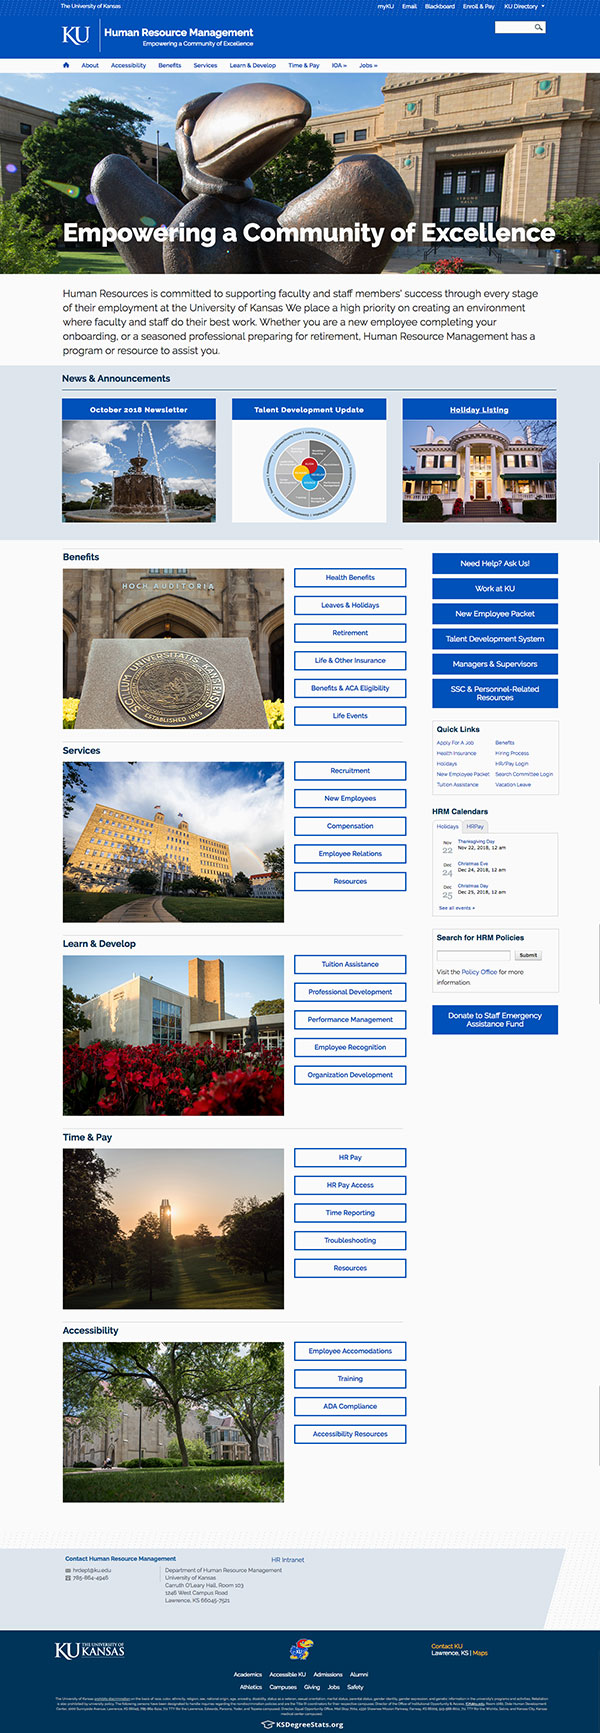 Human Resources home page